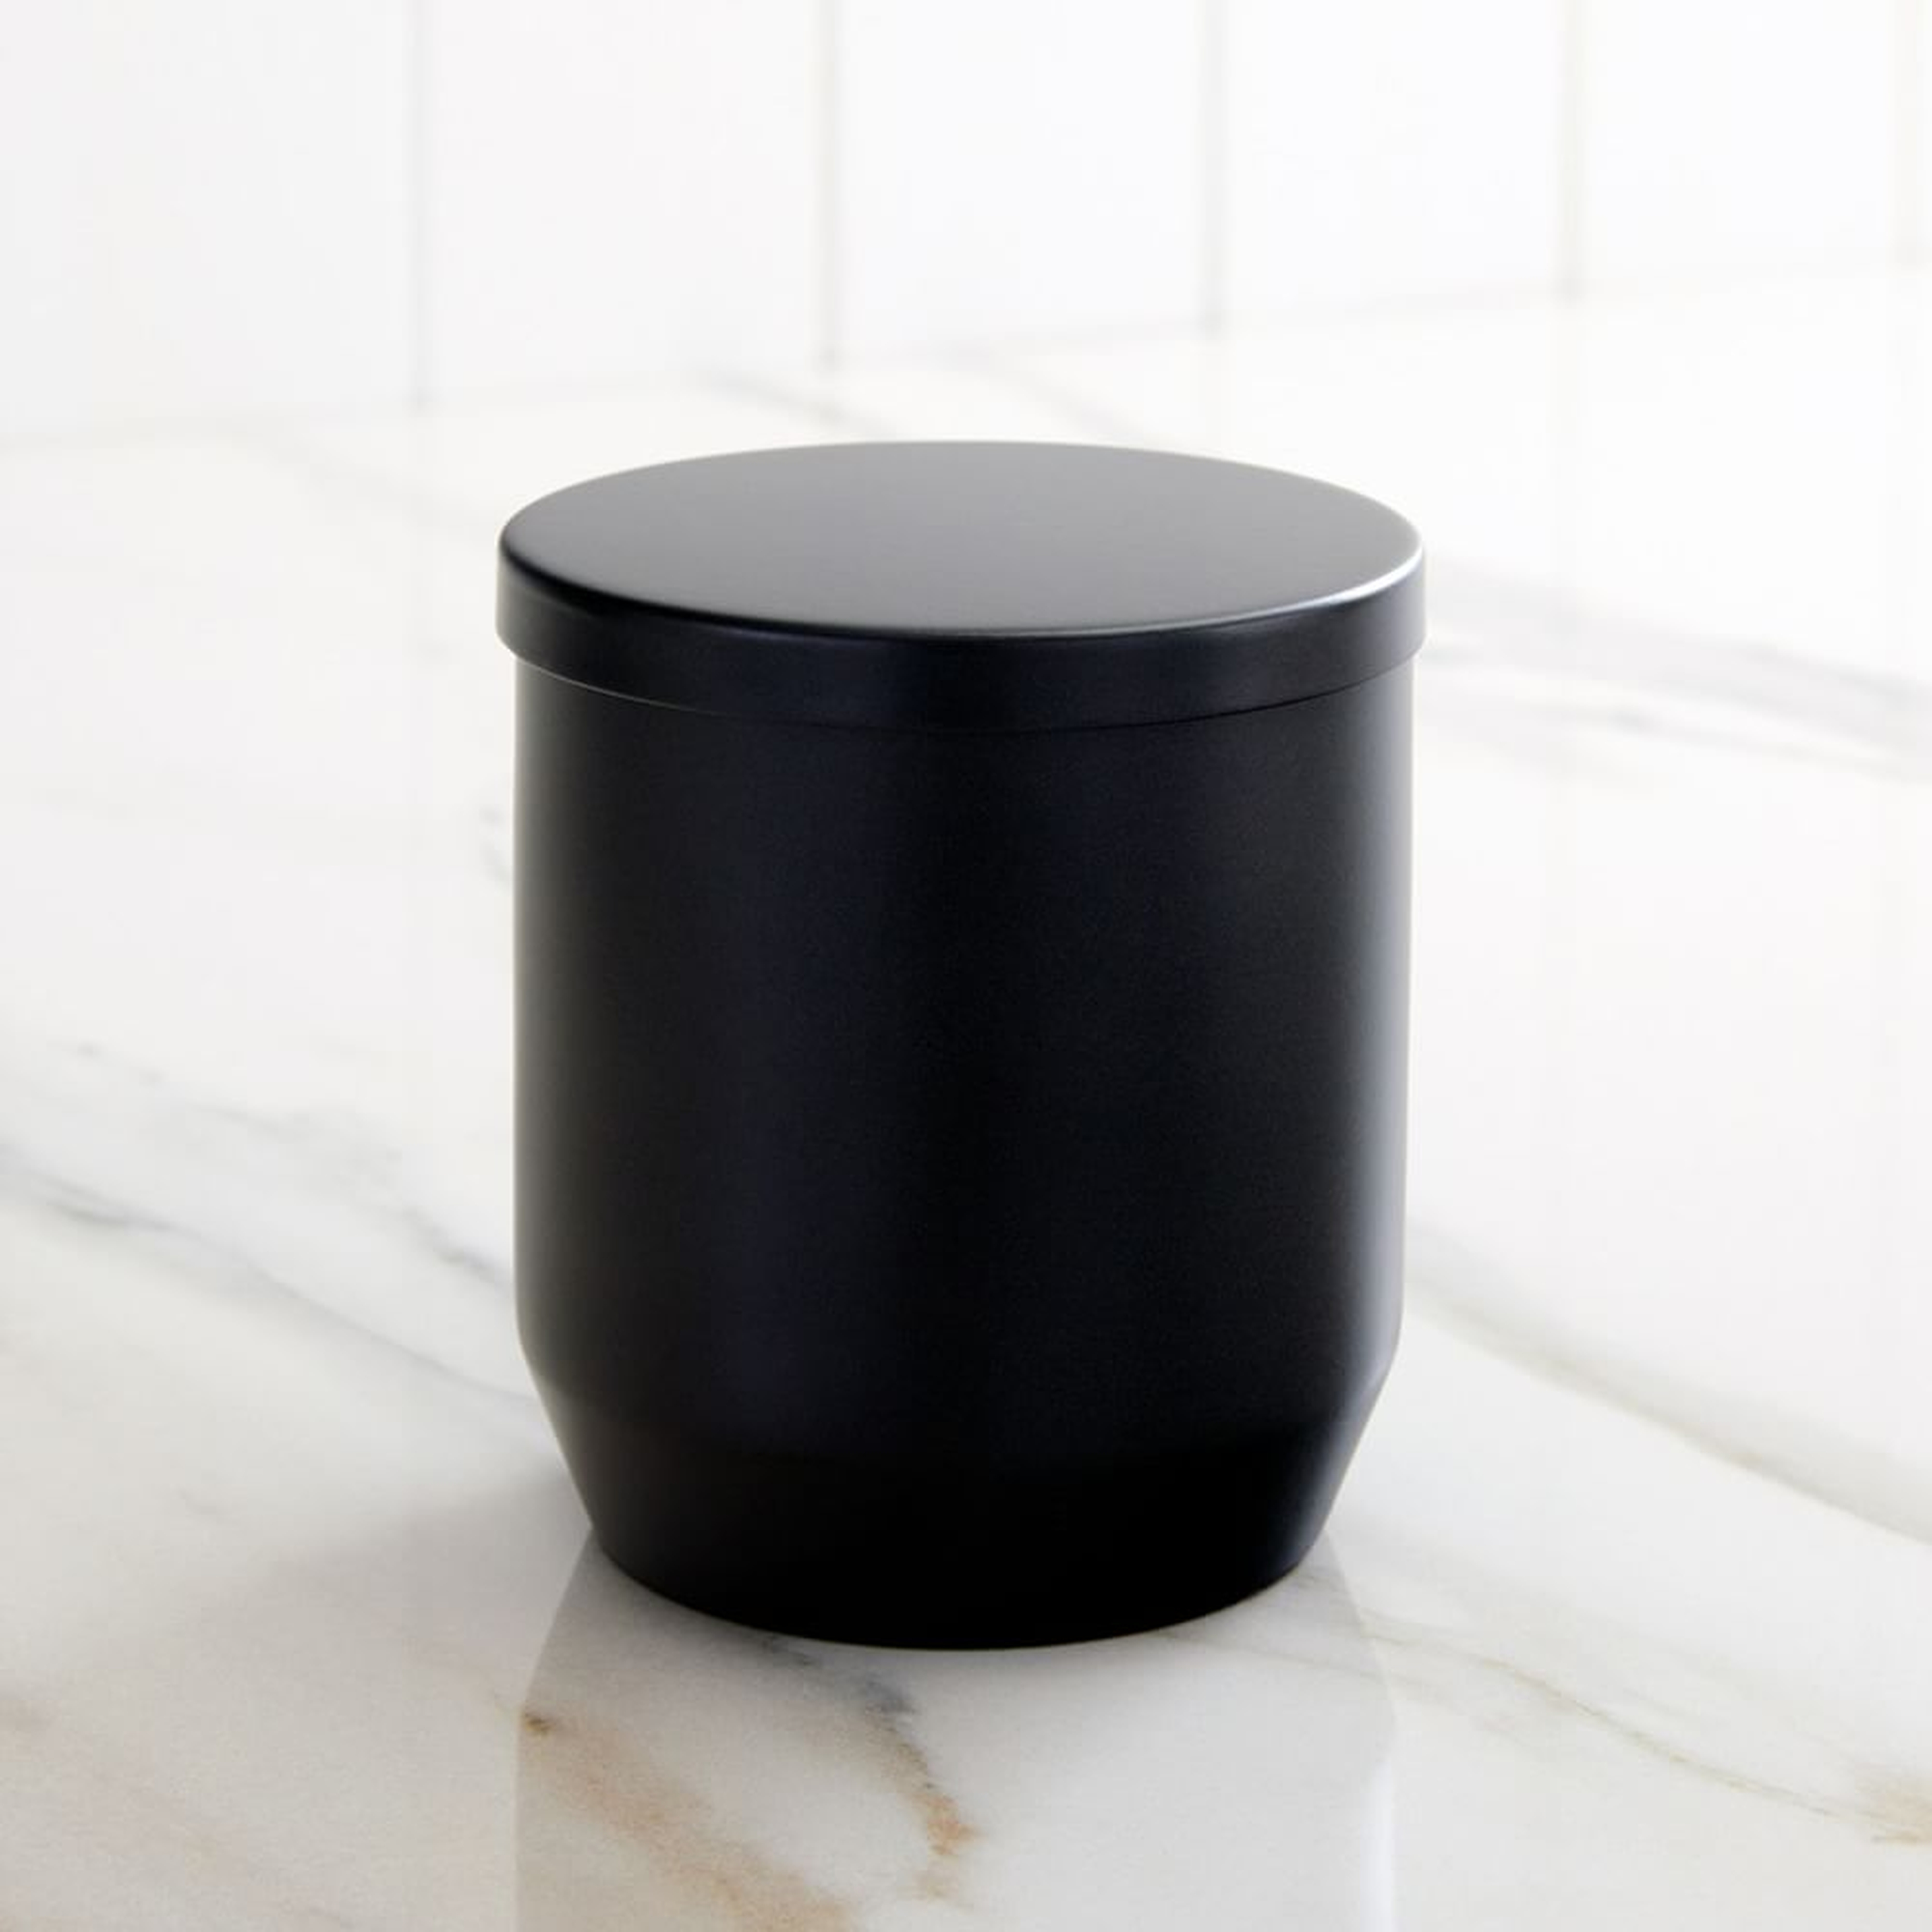 Caspian Bath Accessories, Canister with Lid, Stainless Steel, Dark Bronze - West Elm